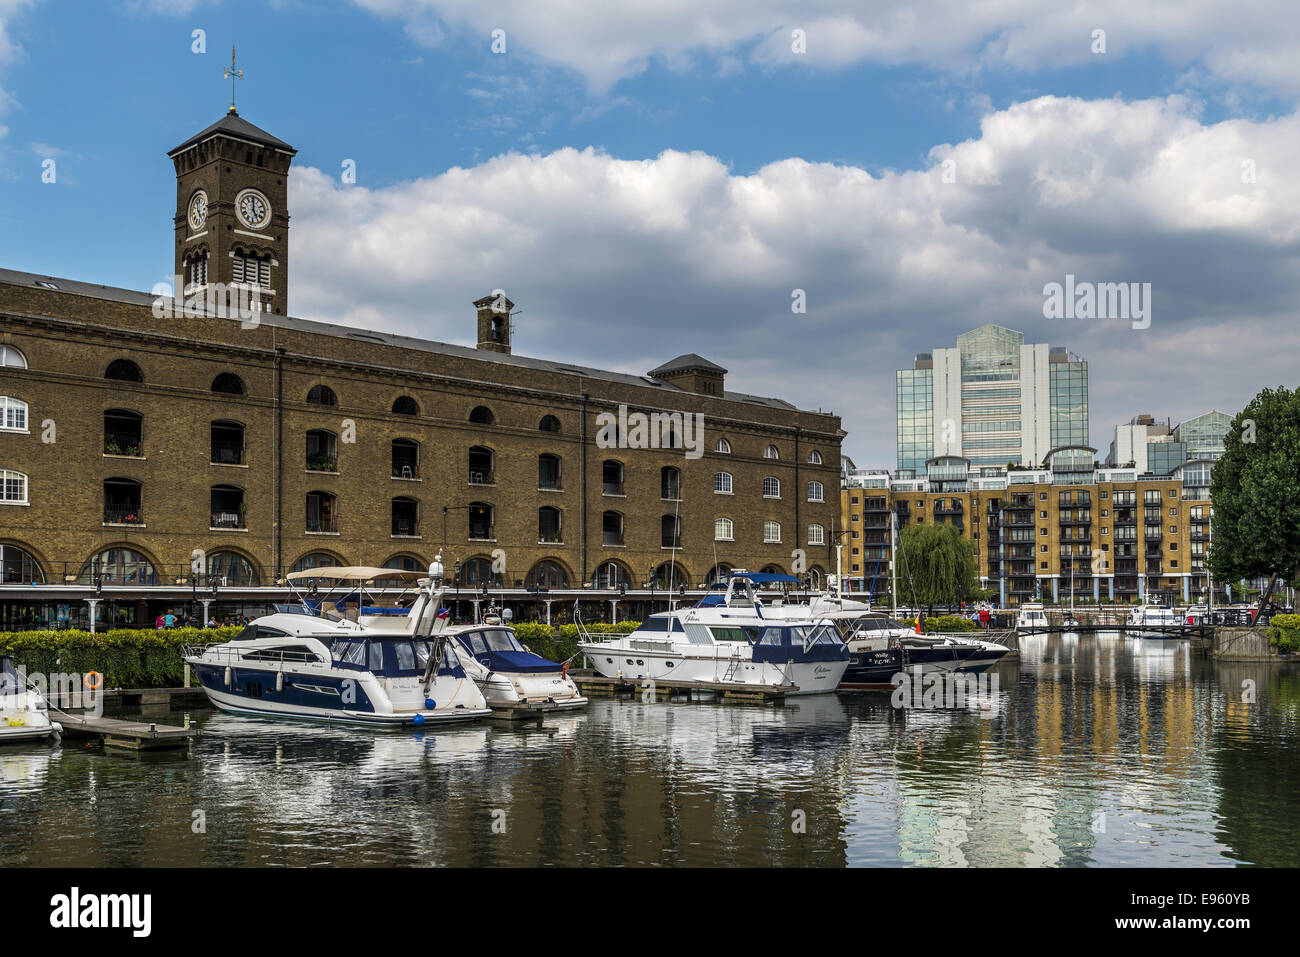 St Katharine Docks in the Borough of Tower Hamlets were docks serving London on the north side of the River Thames just east of Stock Photo